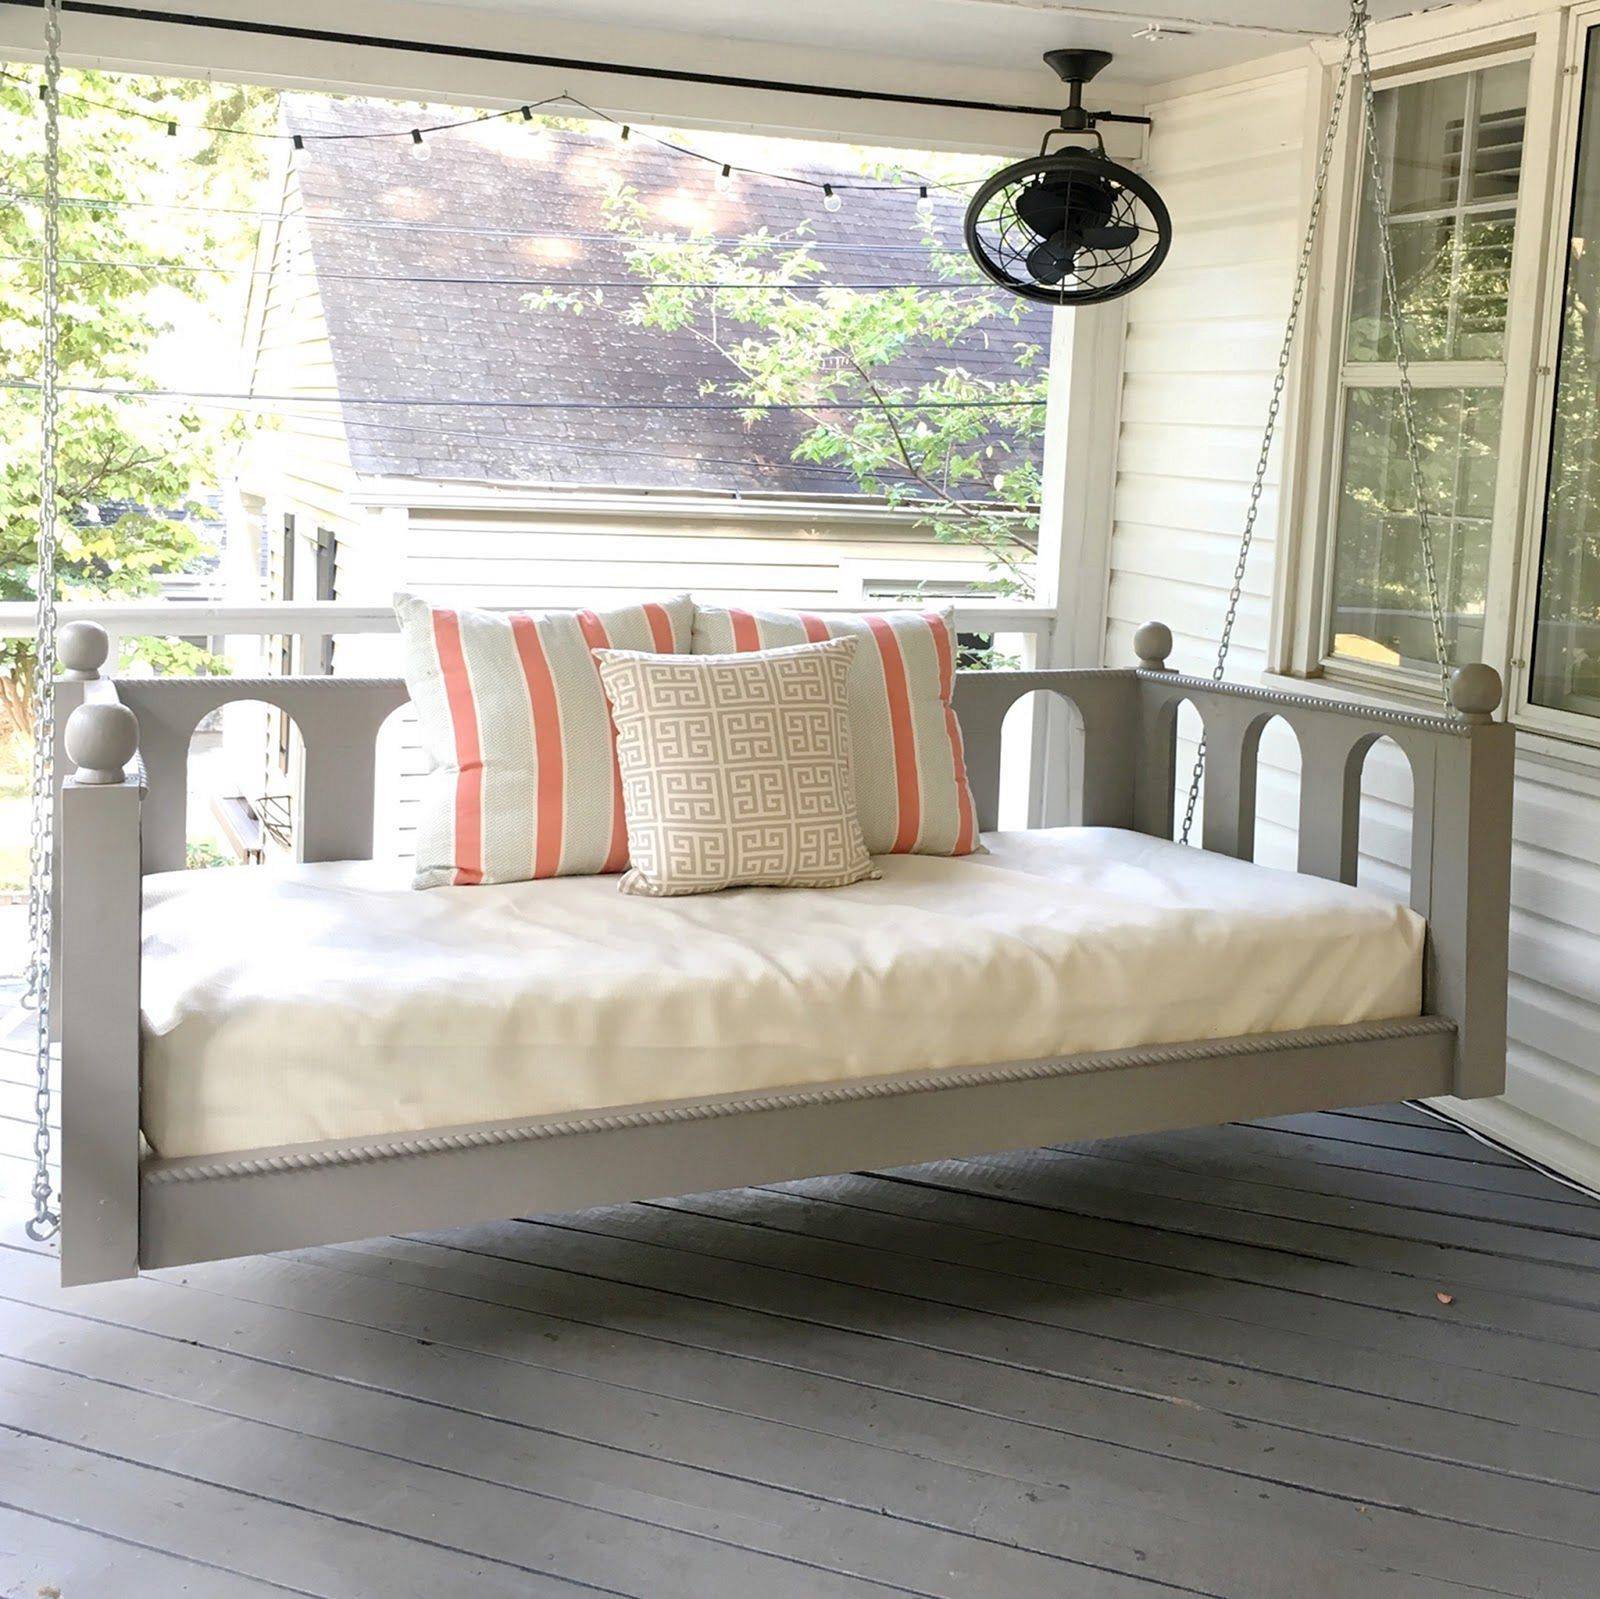 Amazing Southern Living Porch Swing Bed Ideas Youll Love In